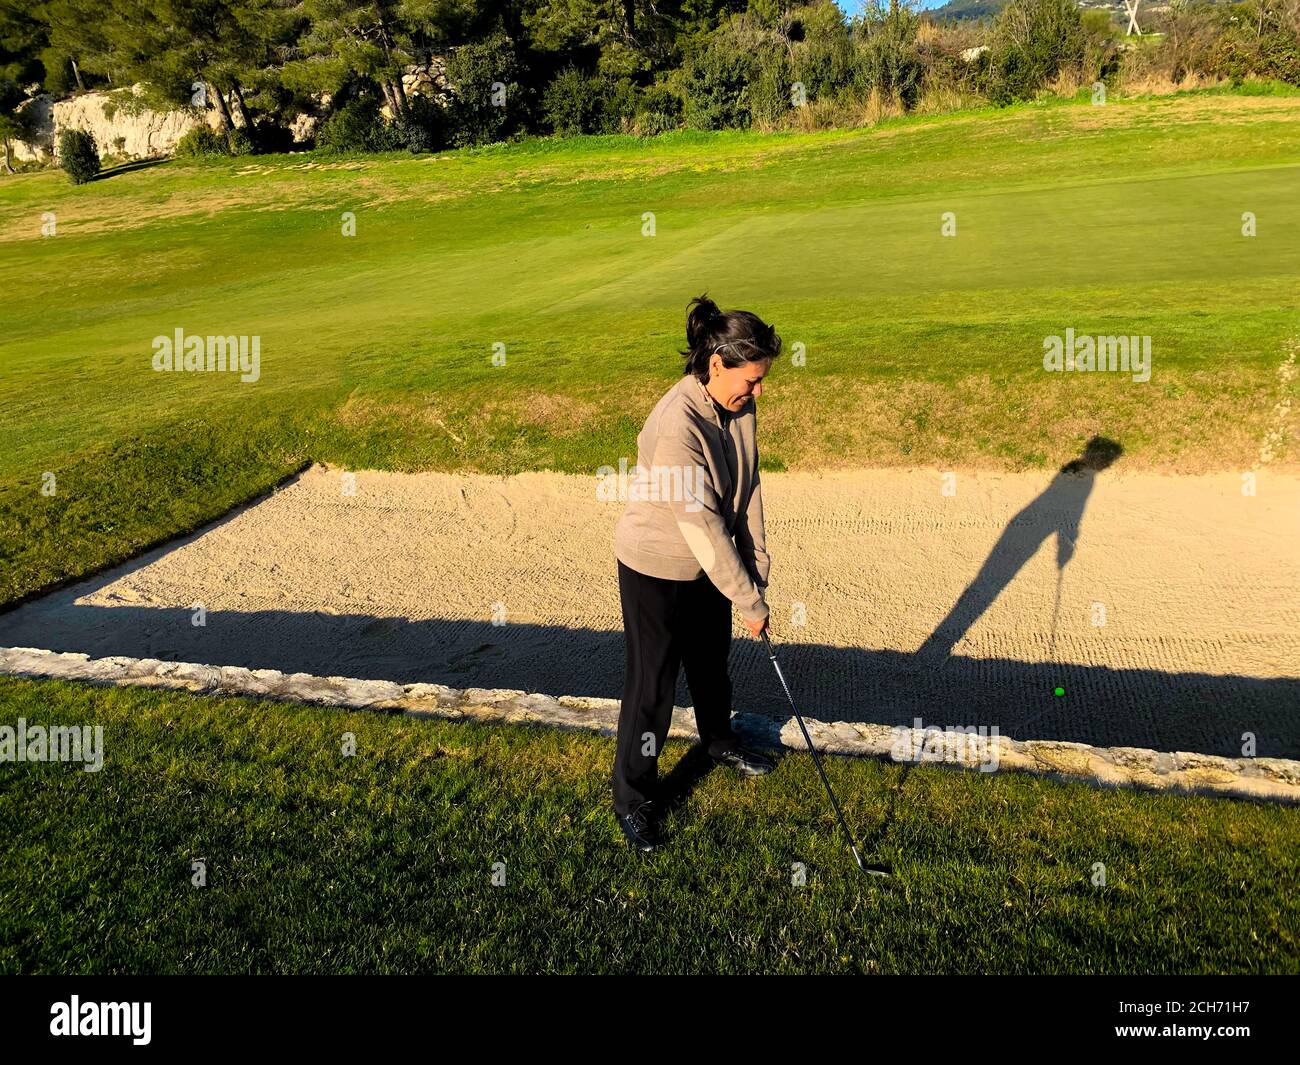 Golfer Playing on Golf Course in France. Stock Photo